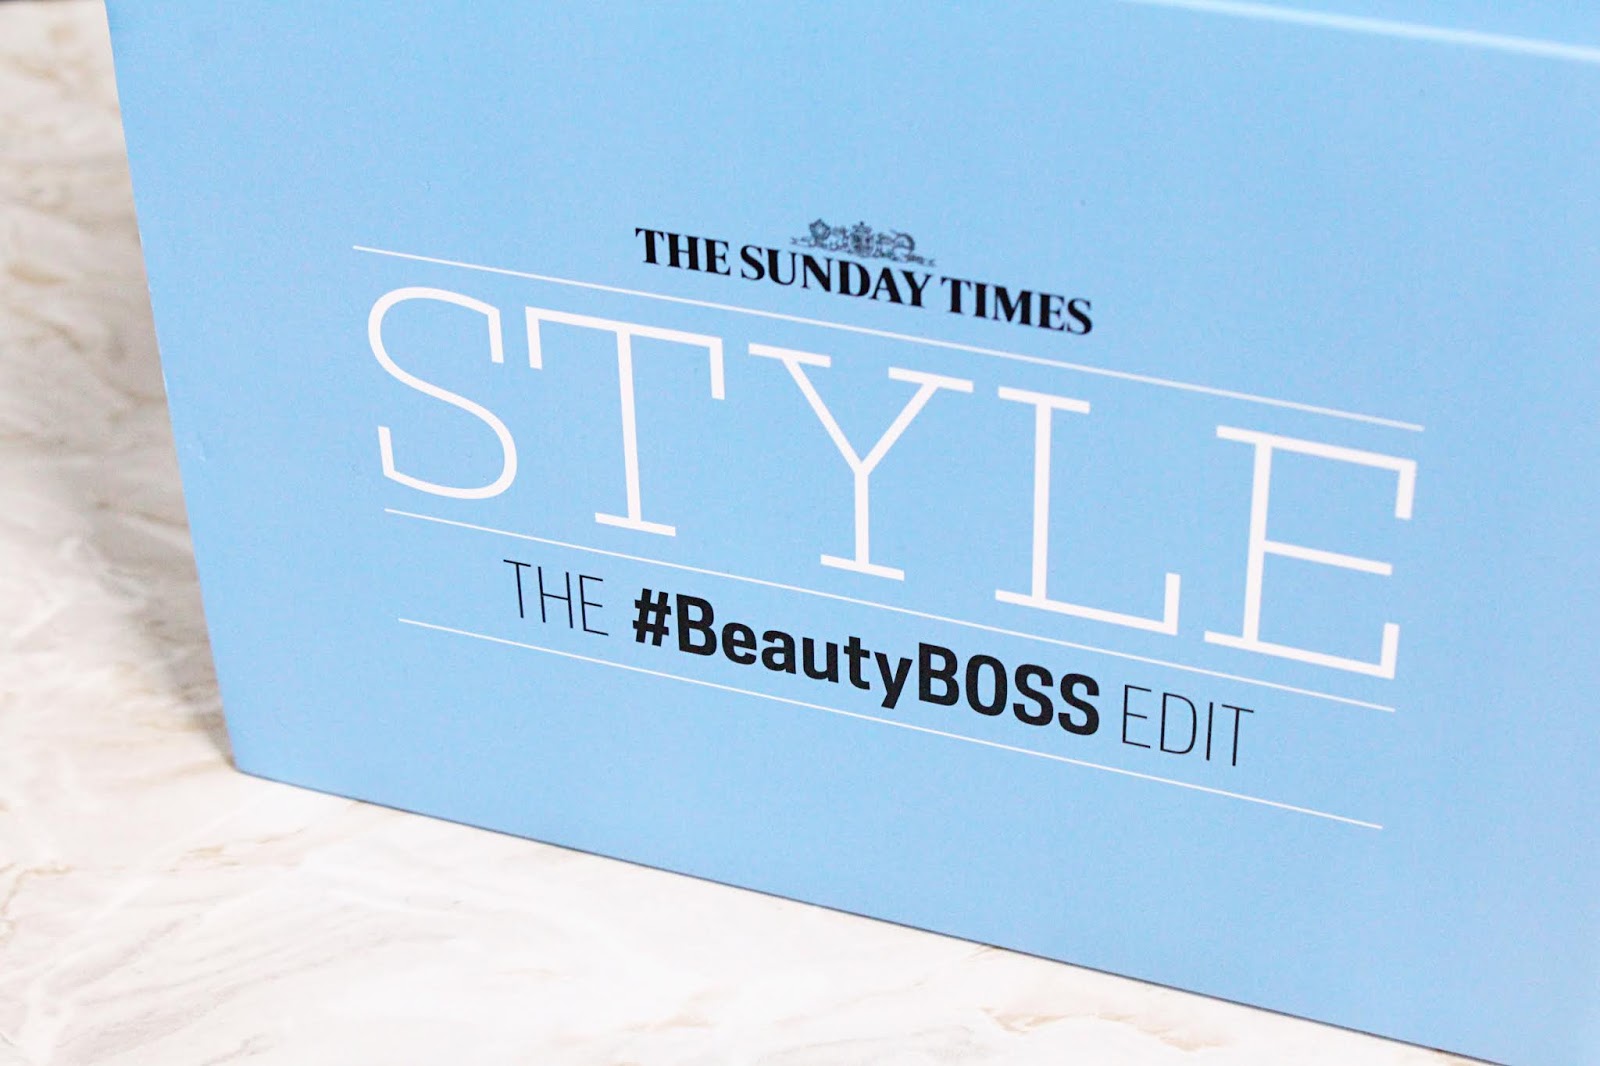 The Sunday Times Style The #BeautyBOSS Edit